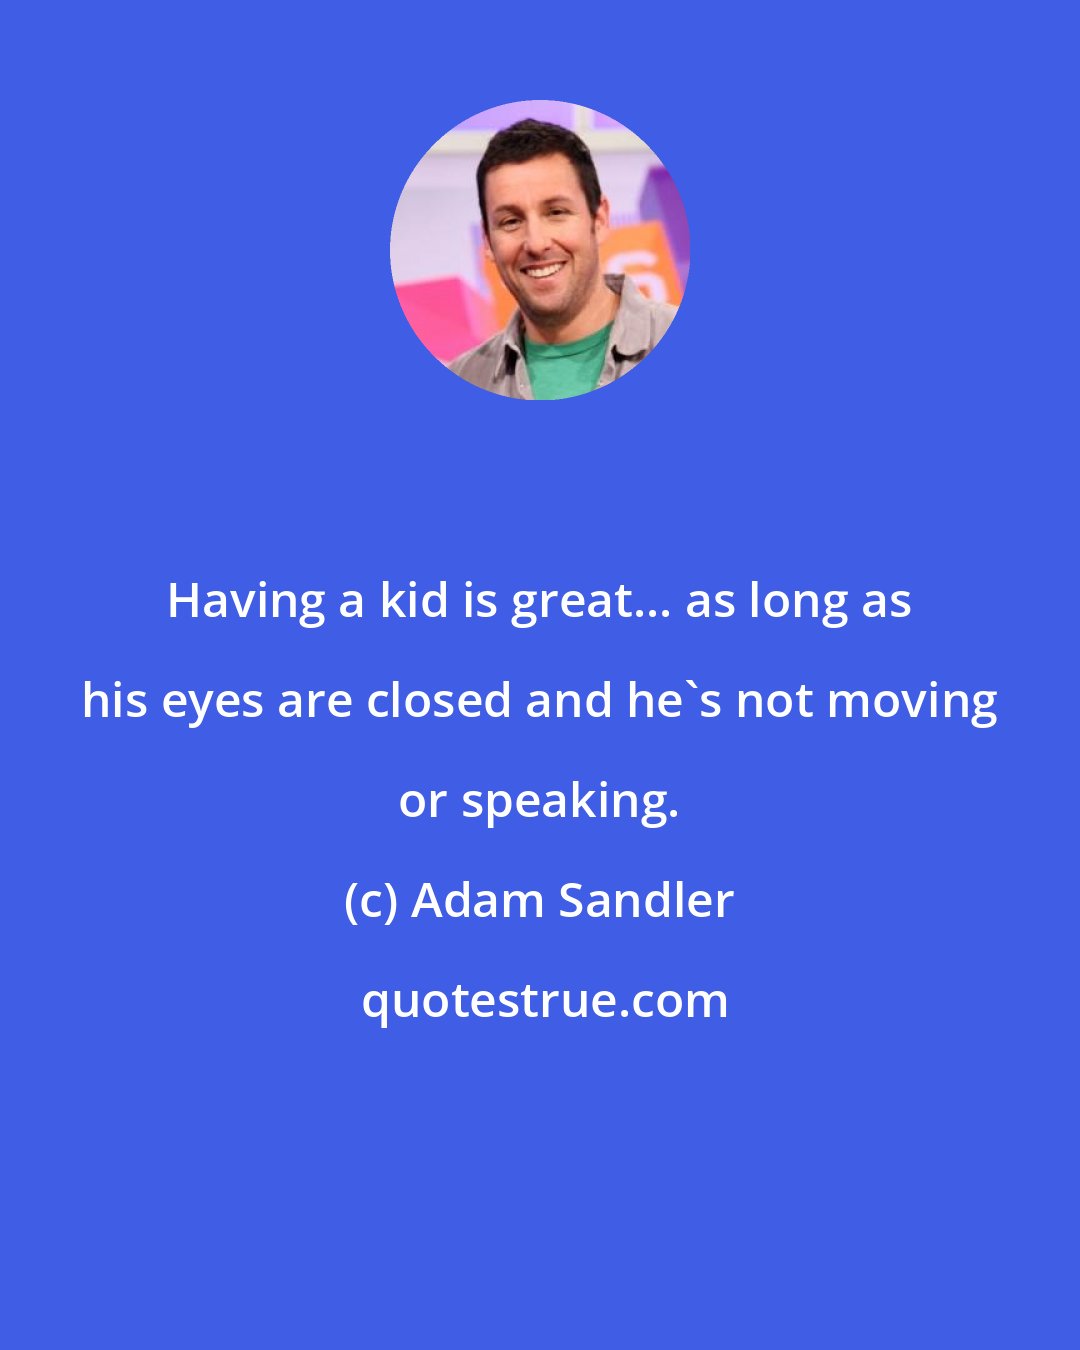 Adam Sandler: Having a kid is great... as long as his eyes are closed and he's not moving or speaking.